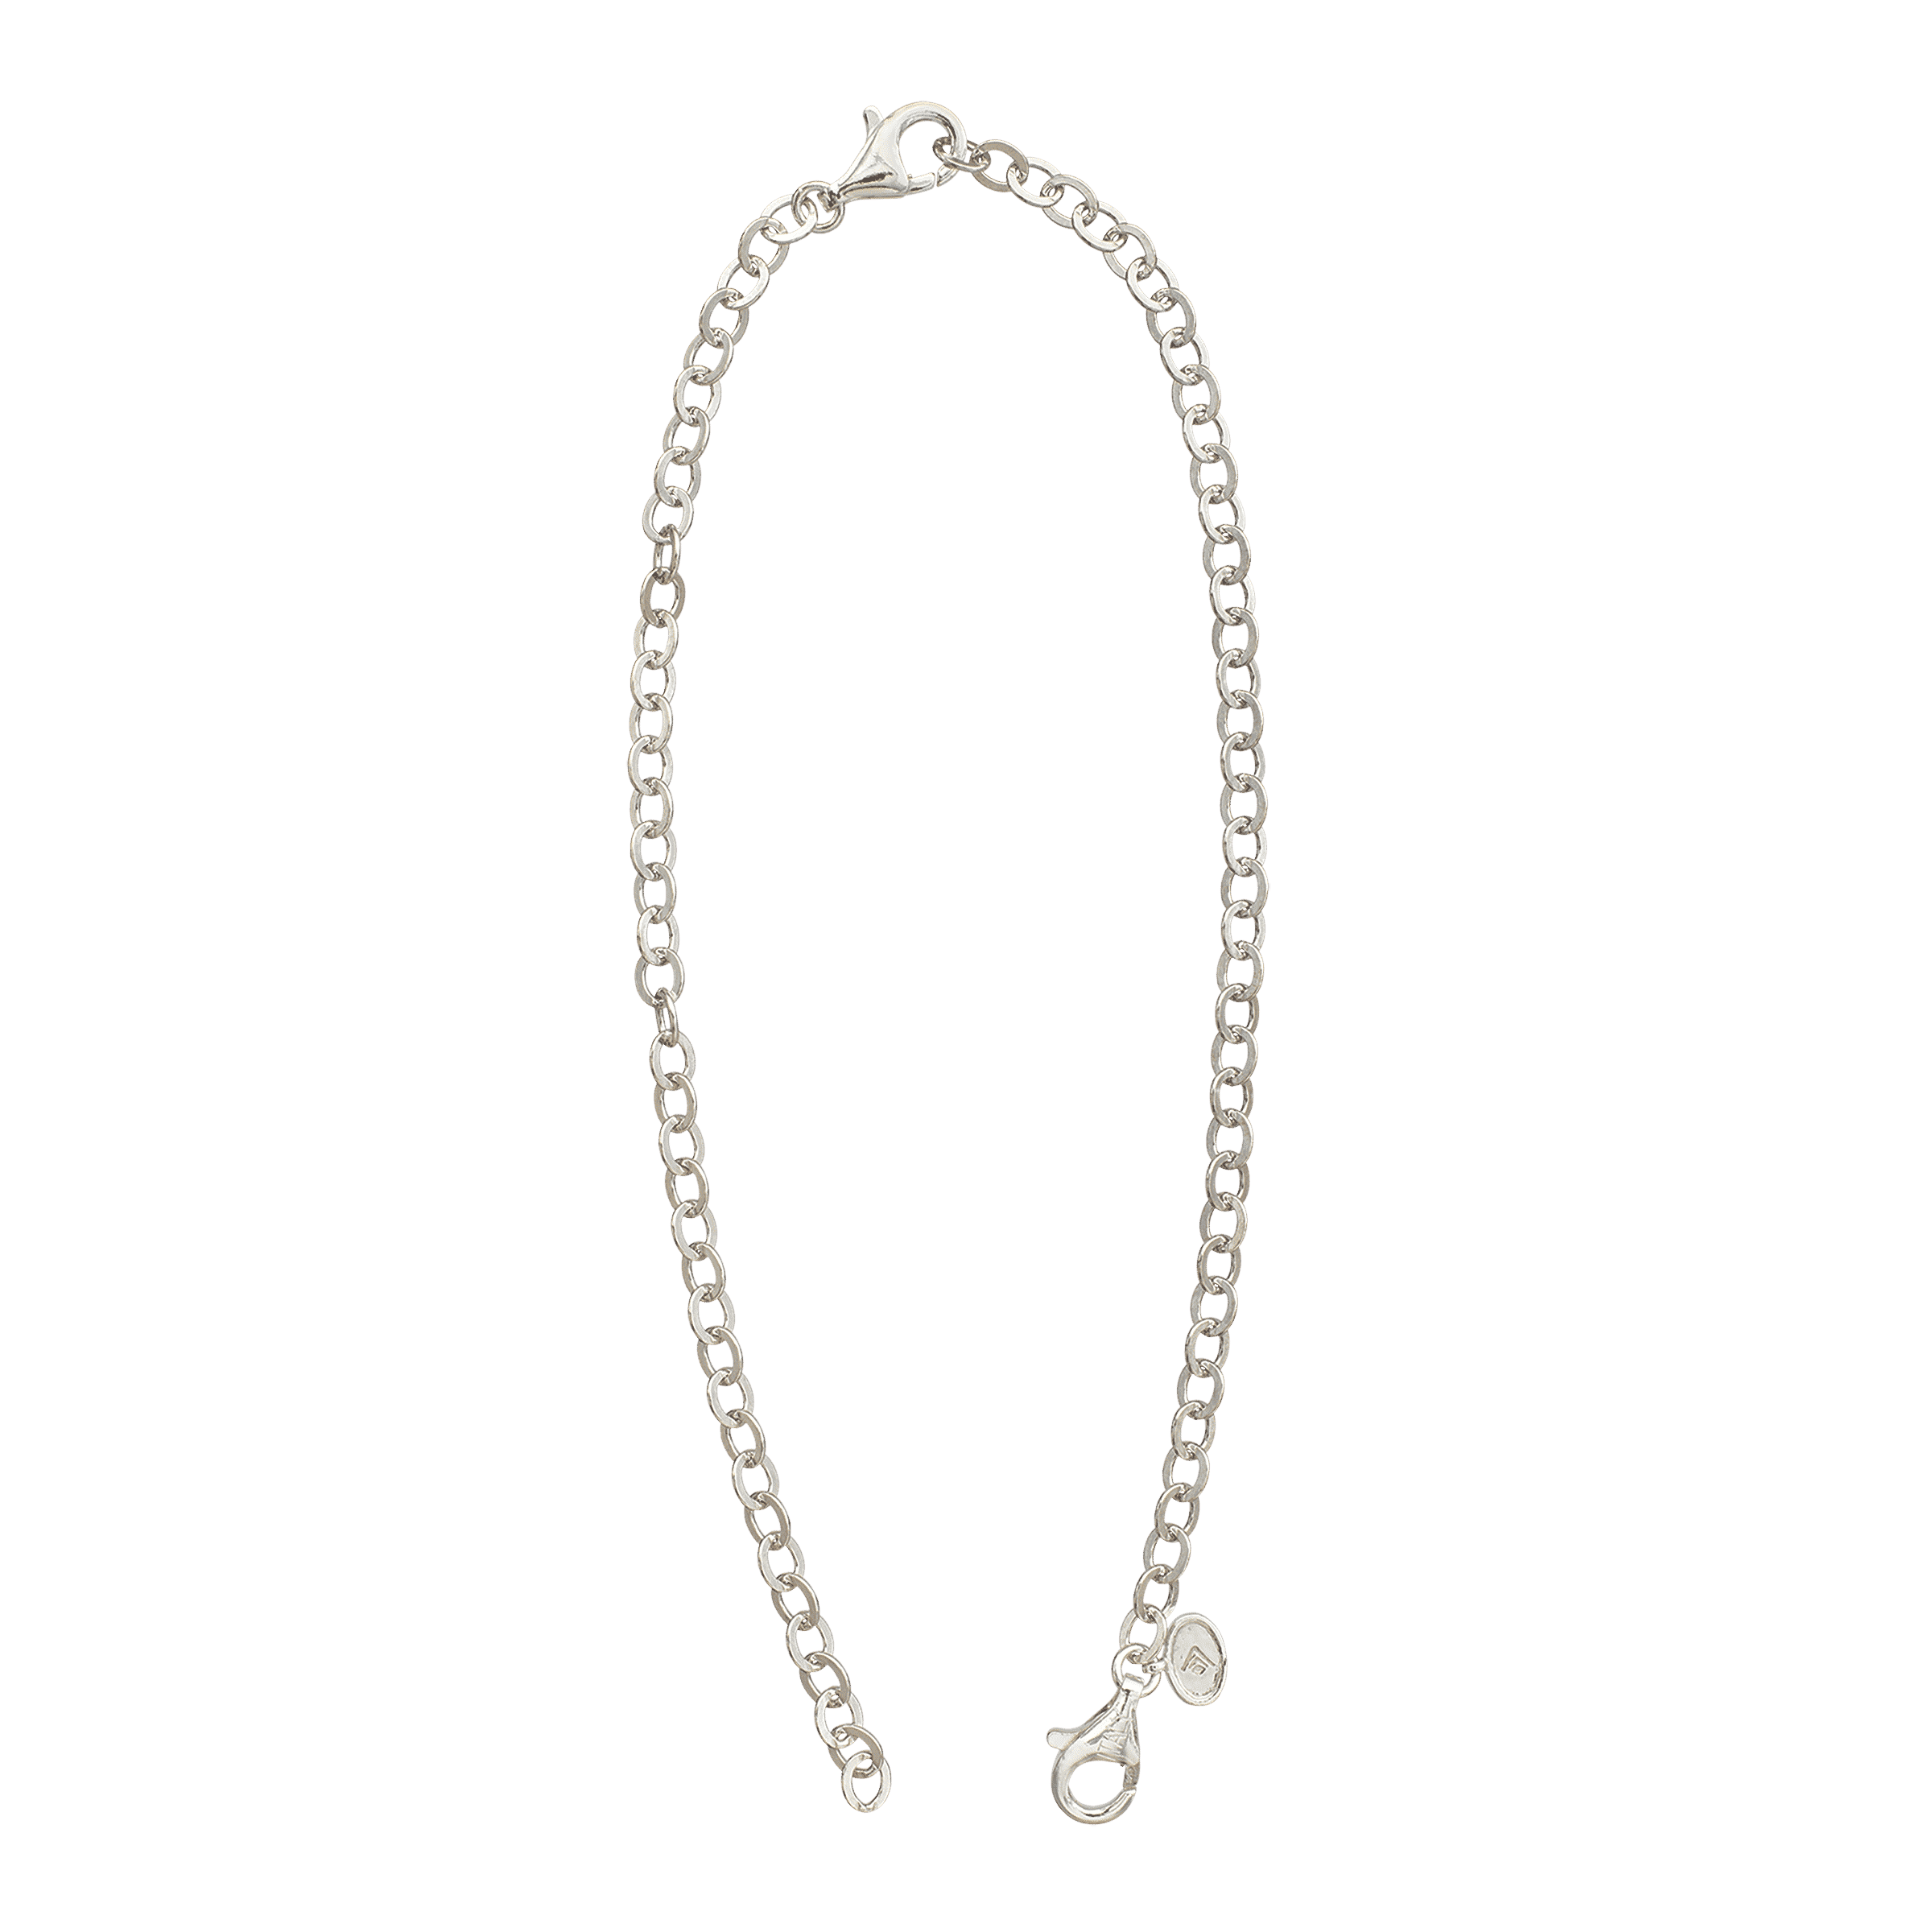 Silver Necklace Extender - Carrie Whelan Designs